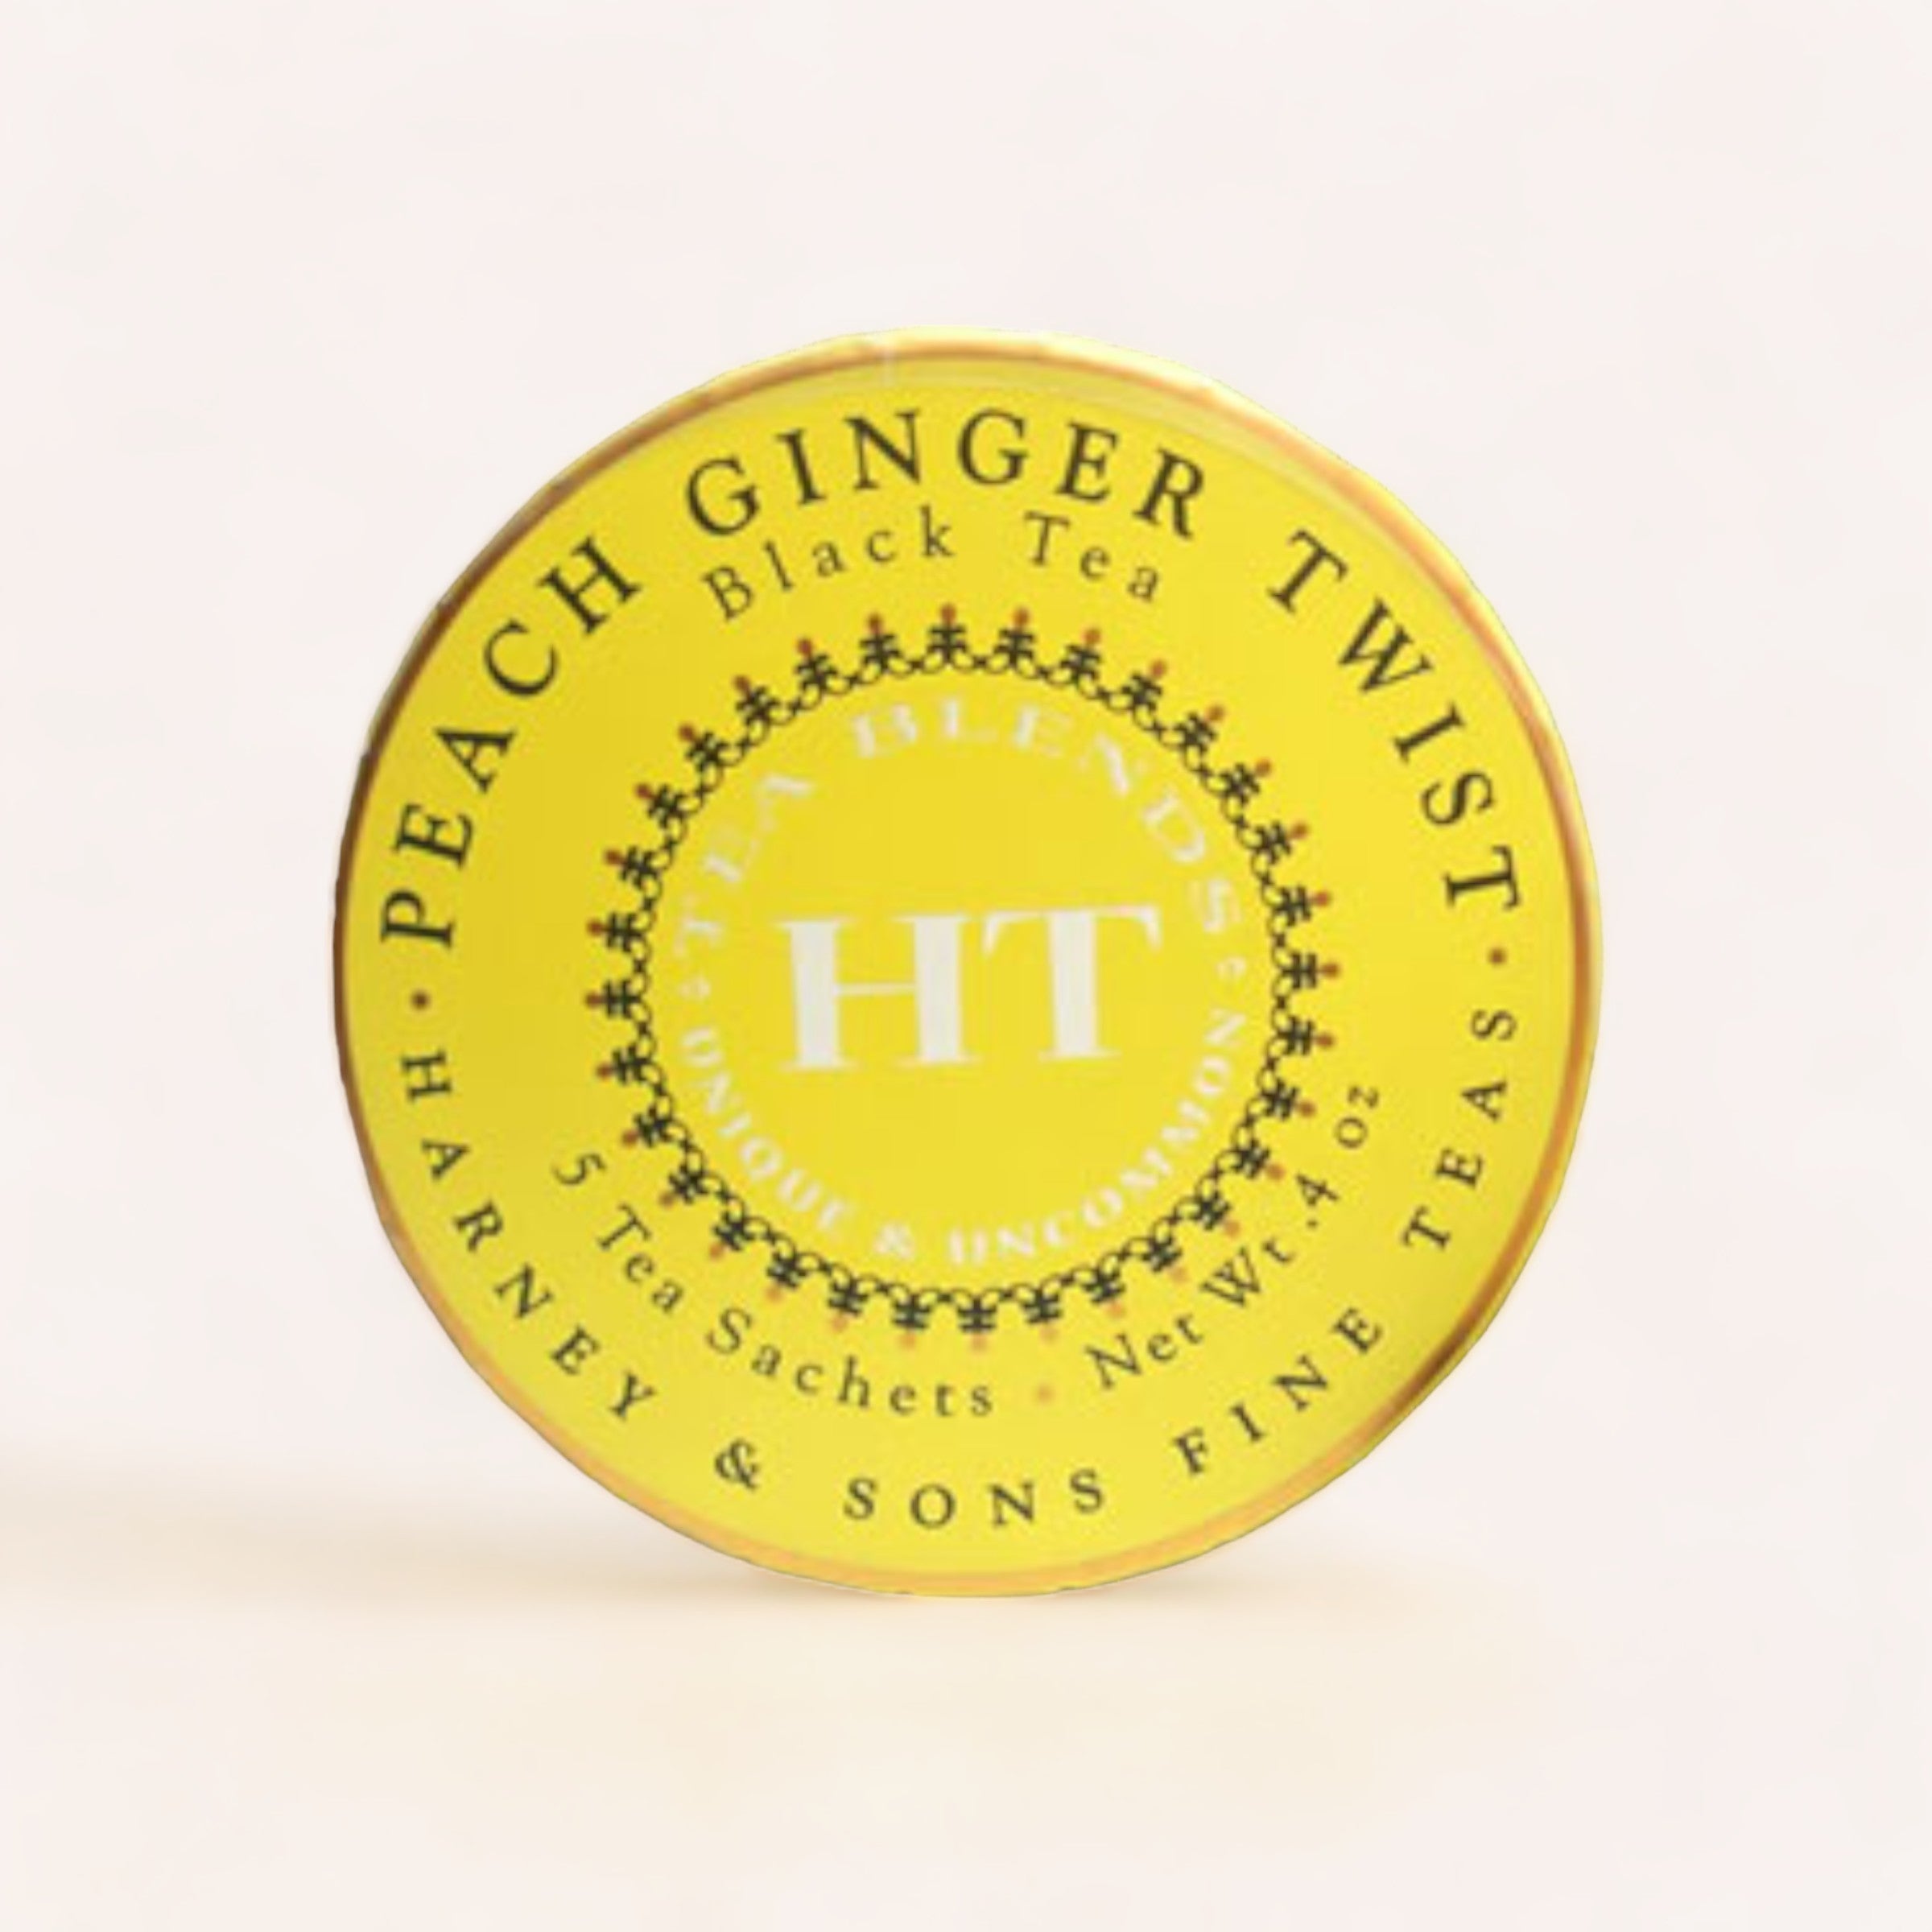 Round yellow tin labeled "Peach Ginger Twist Tea Tagalong by Harney & Sons" containing five pyramid silken sachets.